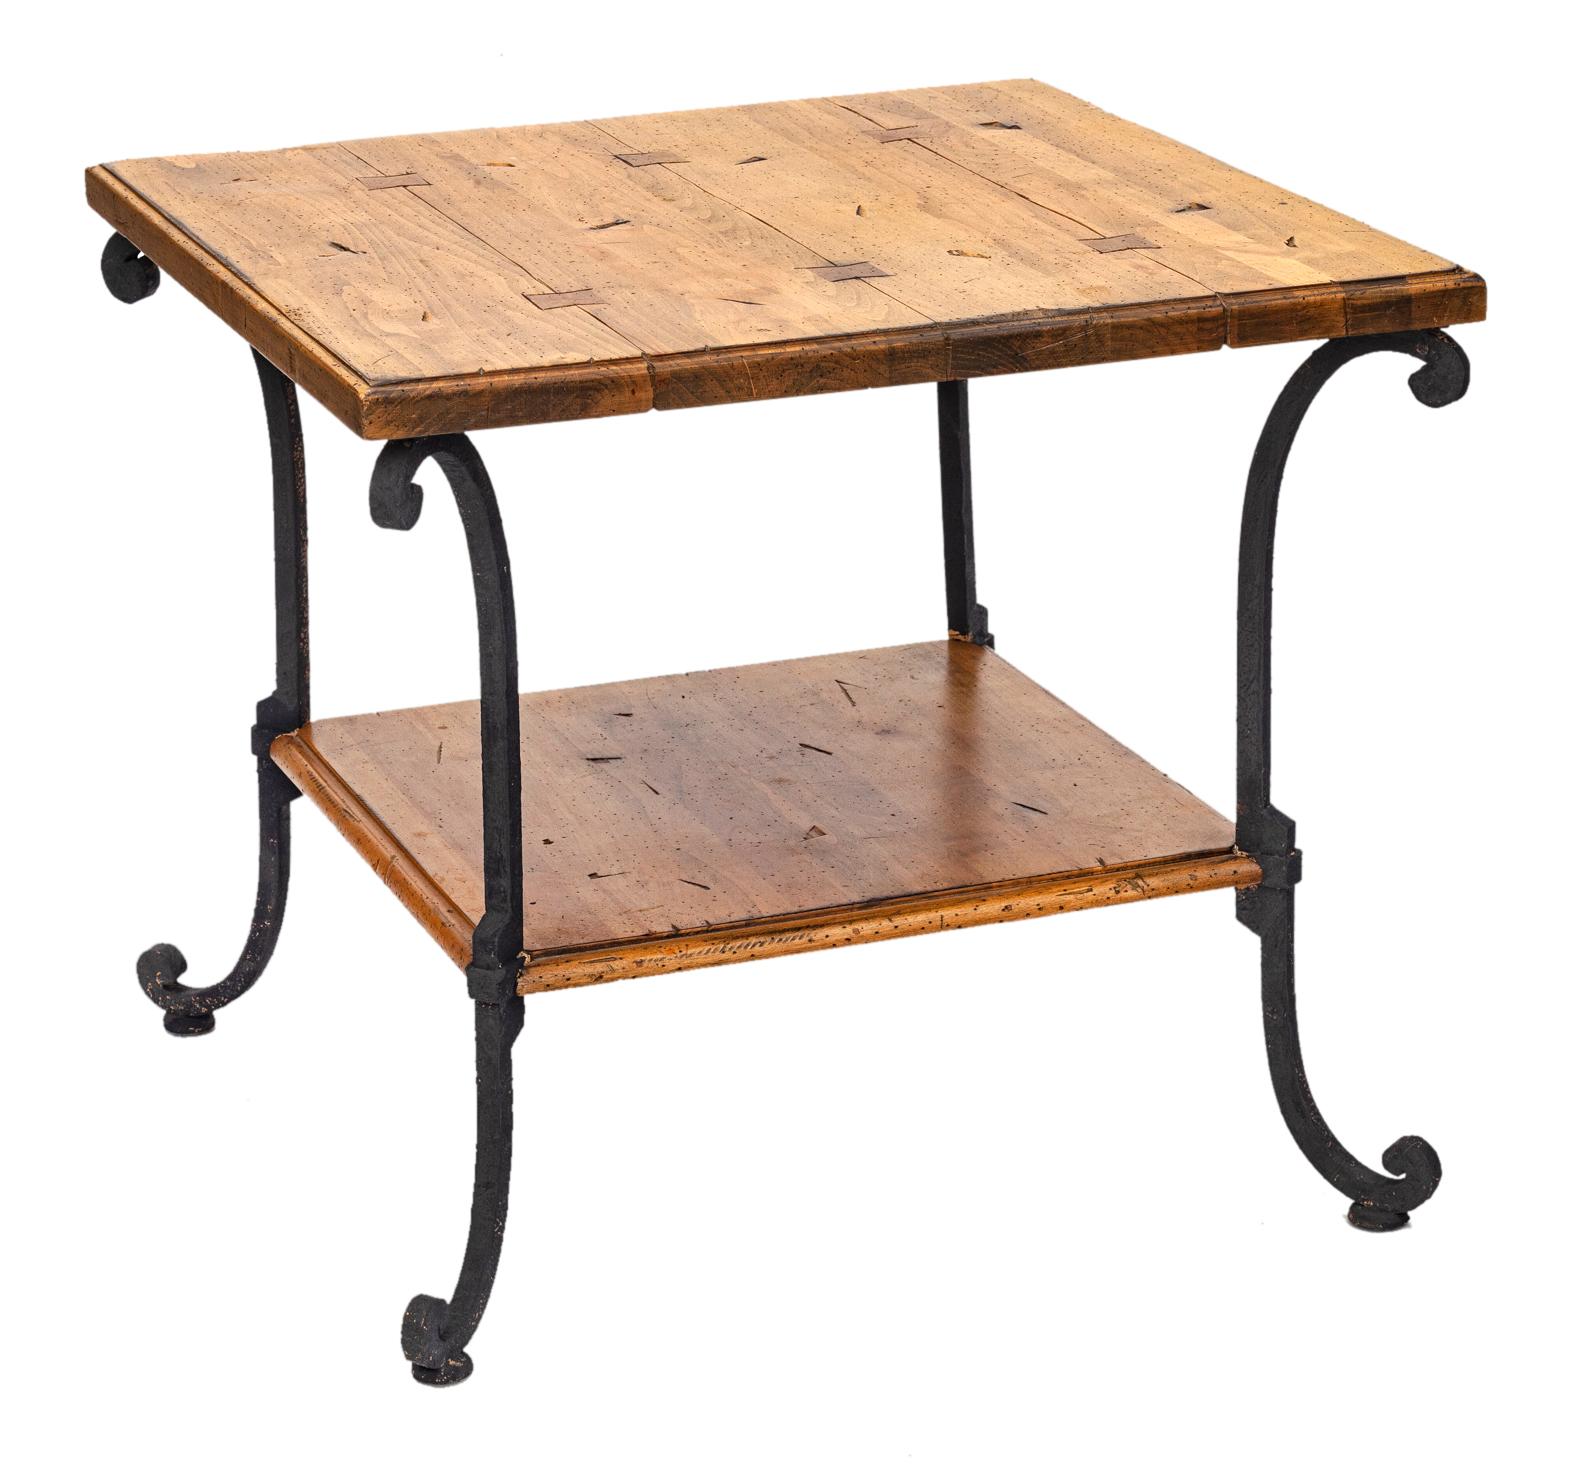 Two-Tiered Pine Table with Wrought Iron Legs In Good Condition For Sale In Malibu, CA